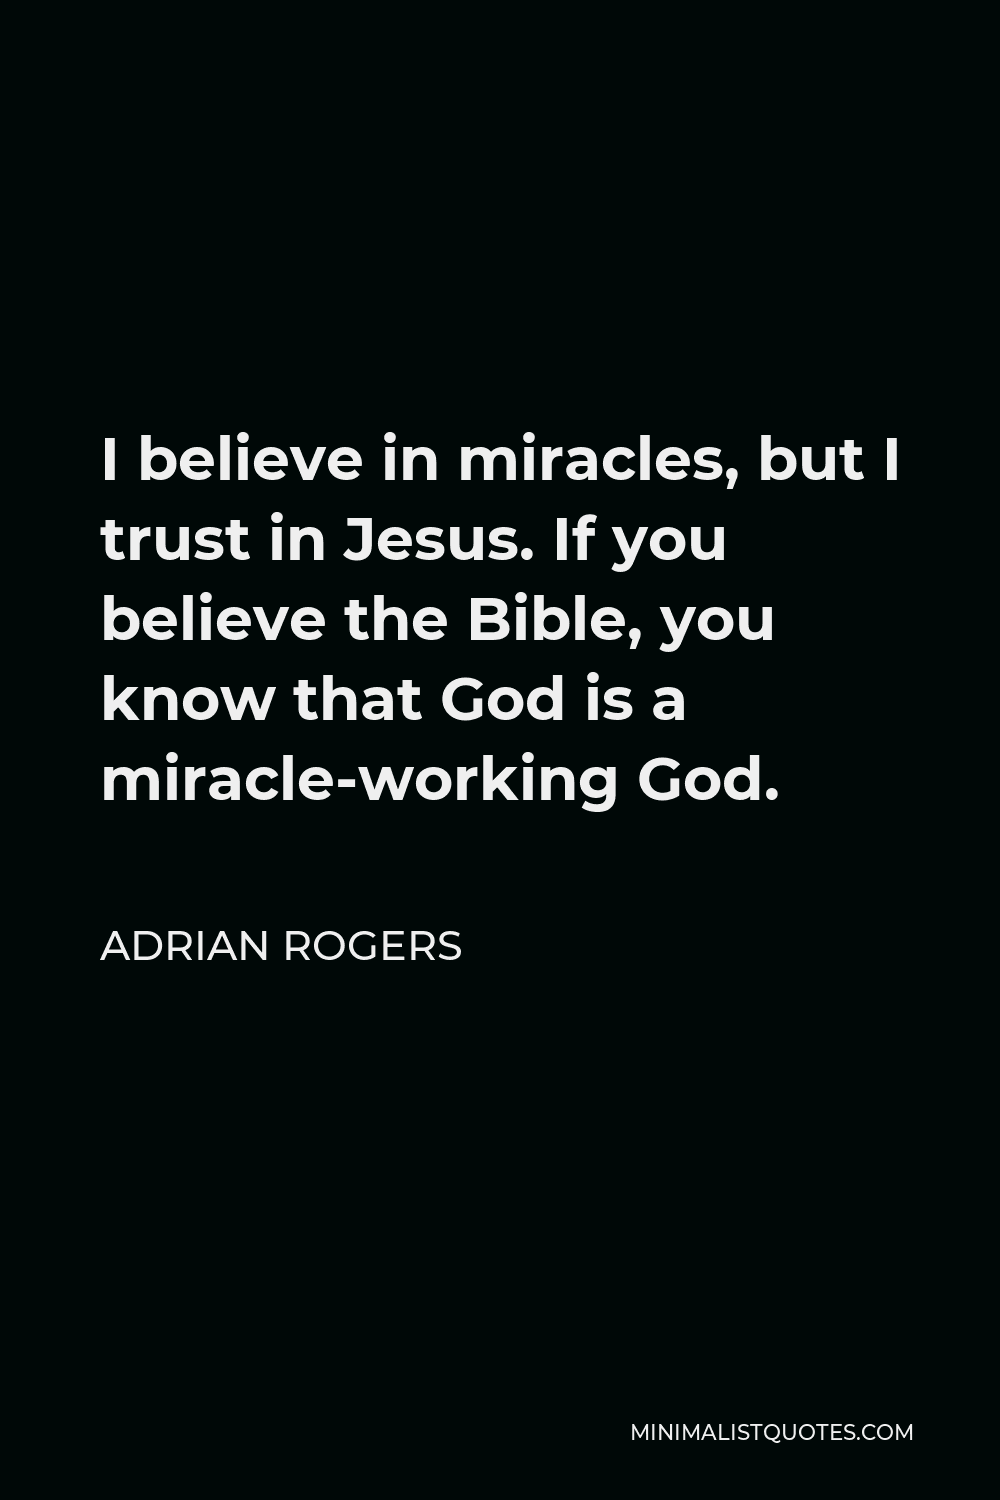 Adrian Rogers Quote - I believe in miracles, but I trust in Jesus. If you believe the Bible, you know that God is a miracle-working God.